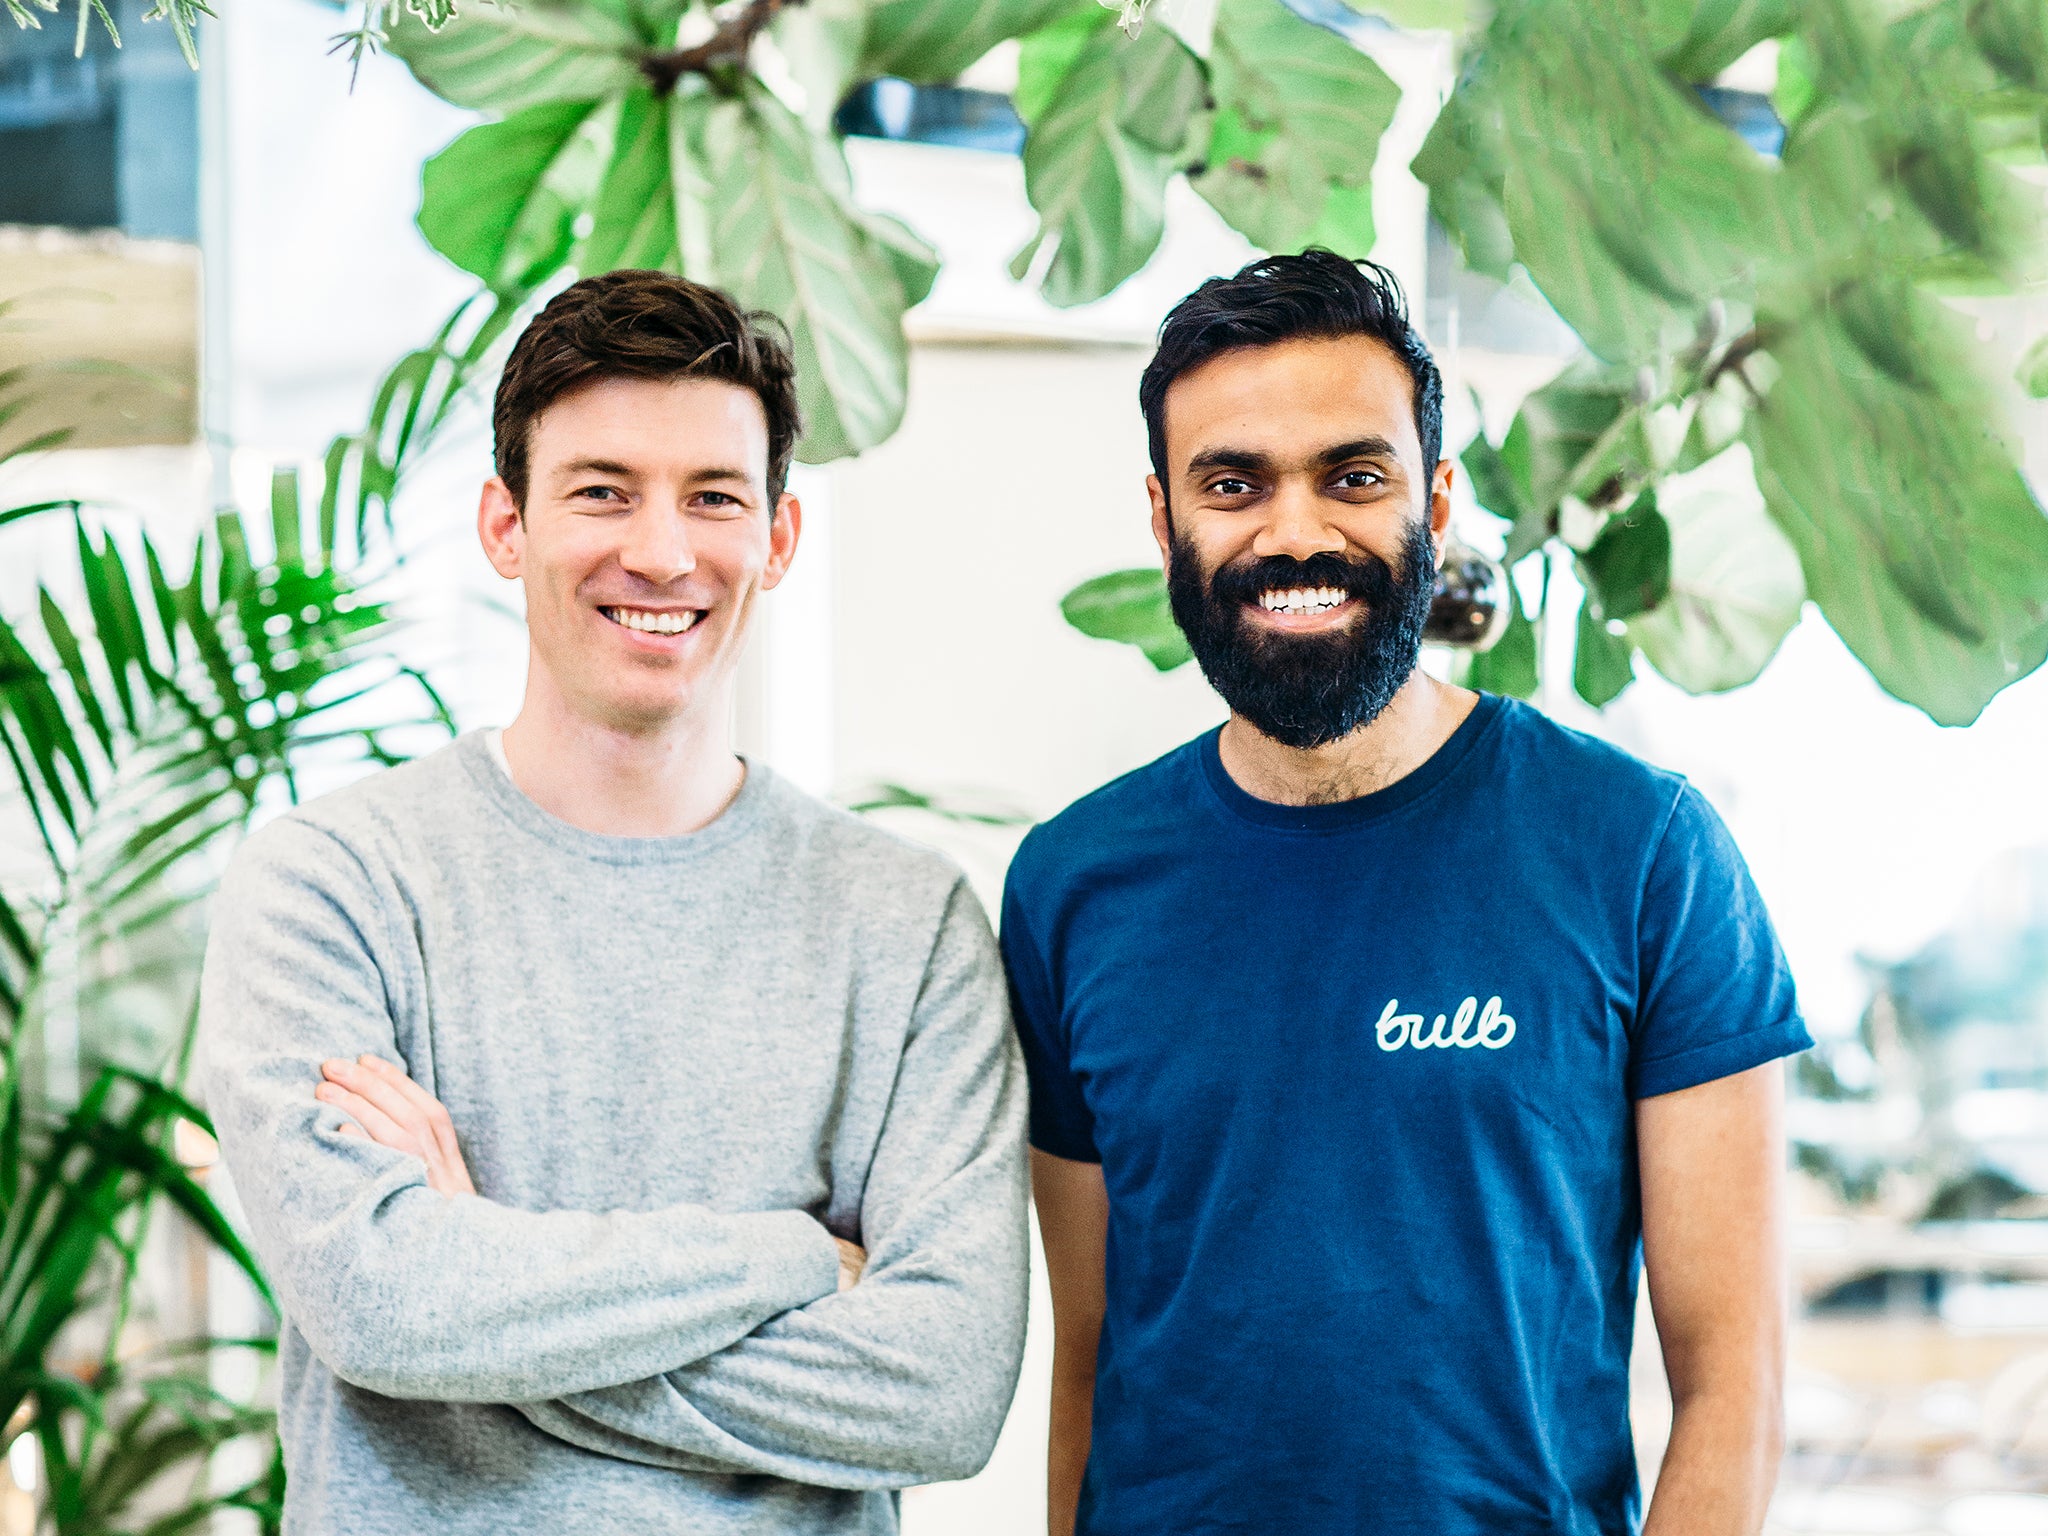 Founders Hayden Wood and Amrit Gudka launched Bulb in 2015